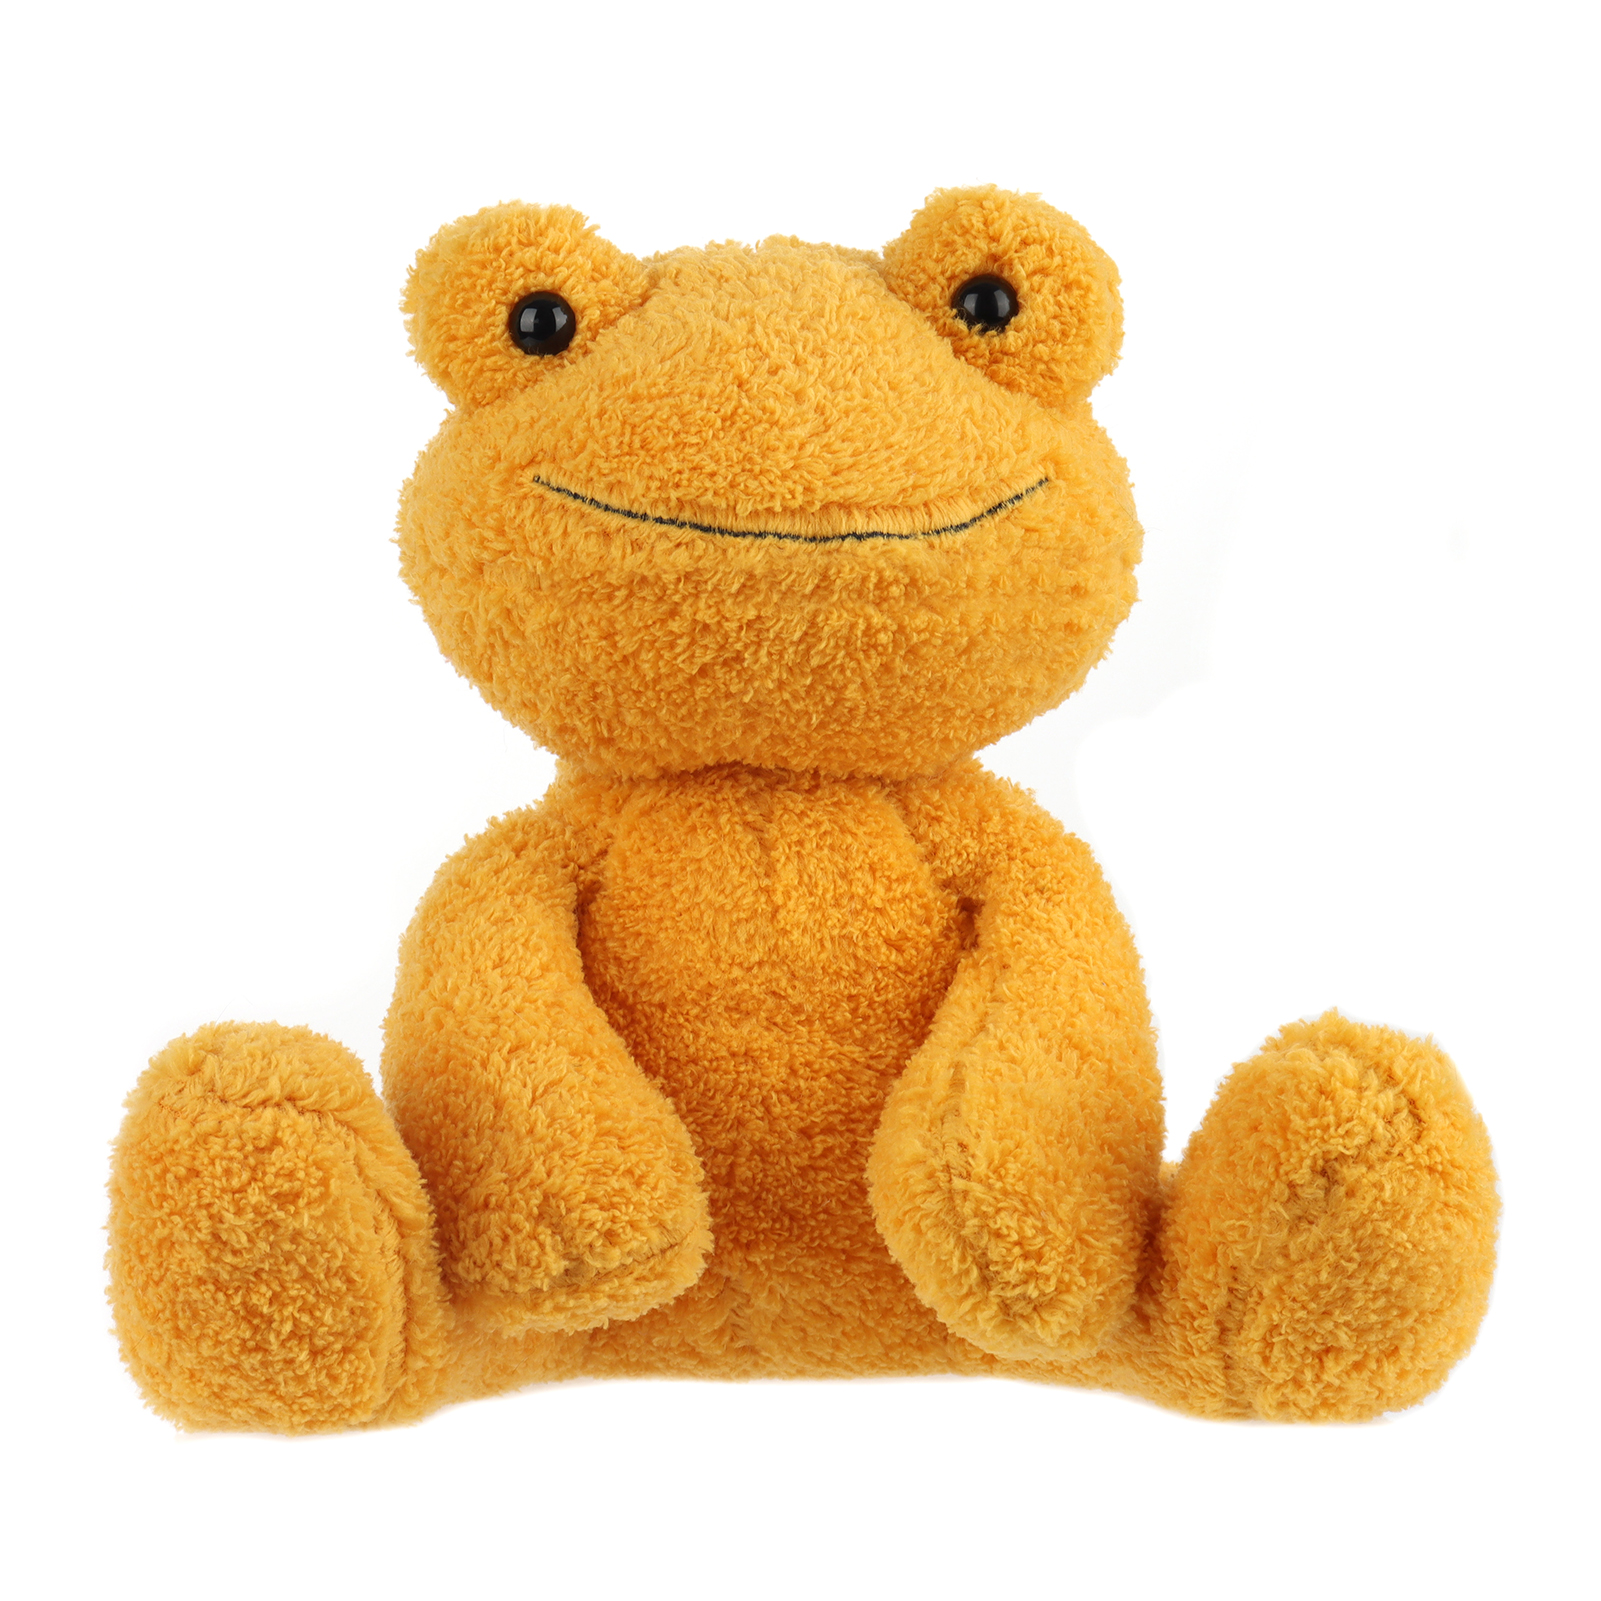 Wholesale Frog Plush Toy Manufacturer and Supplier, Factory